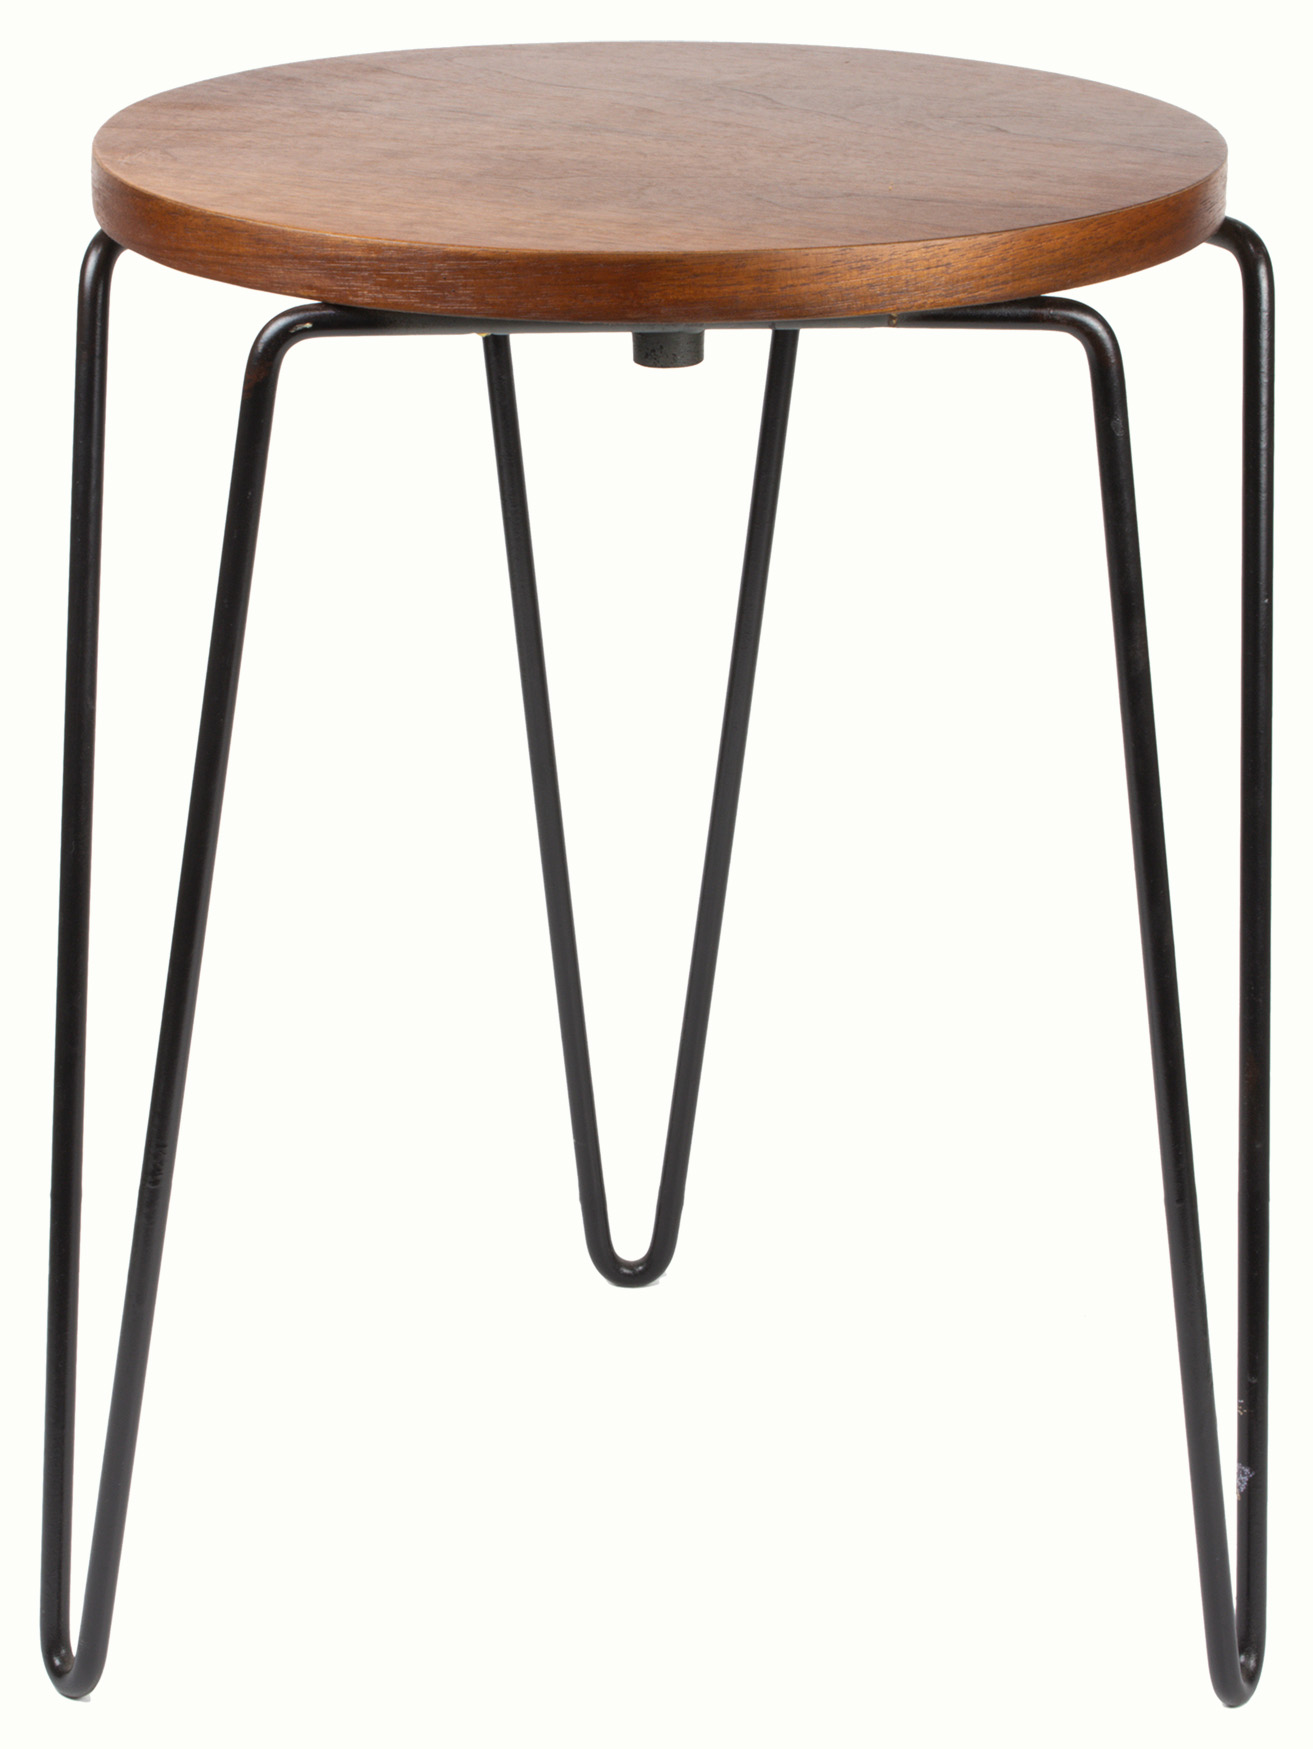 Florence Knoll stacking stool model 75